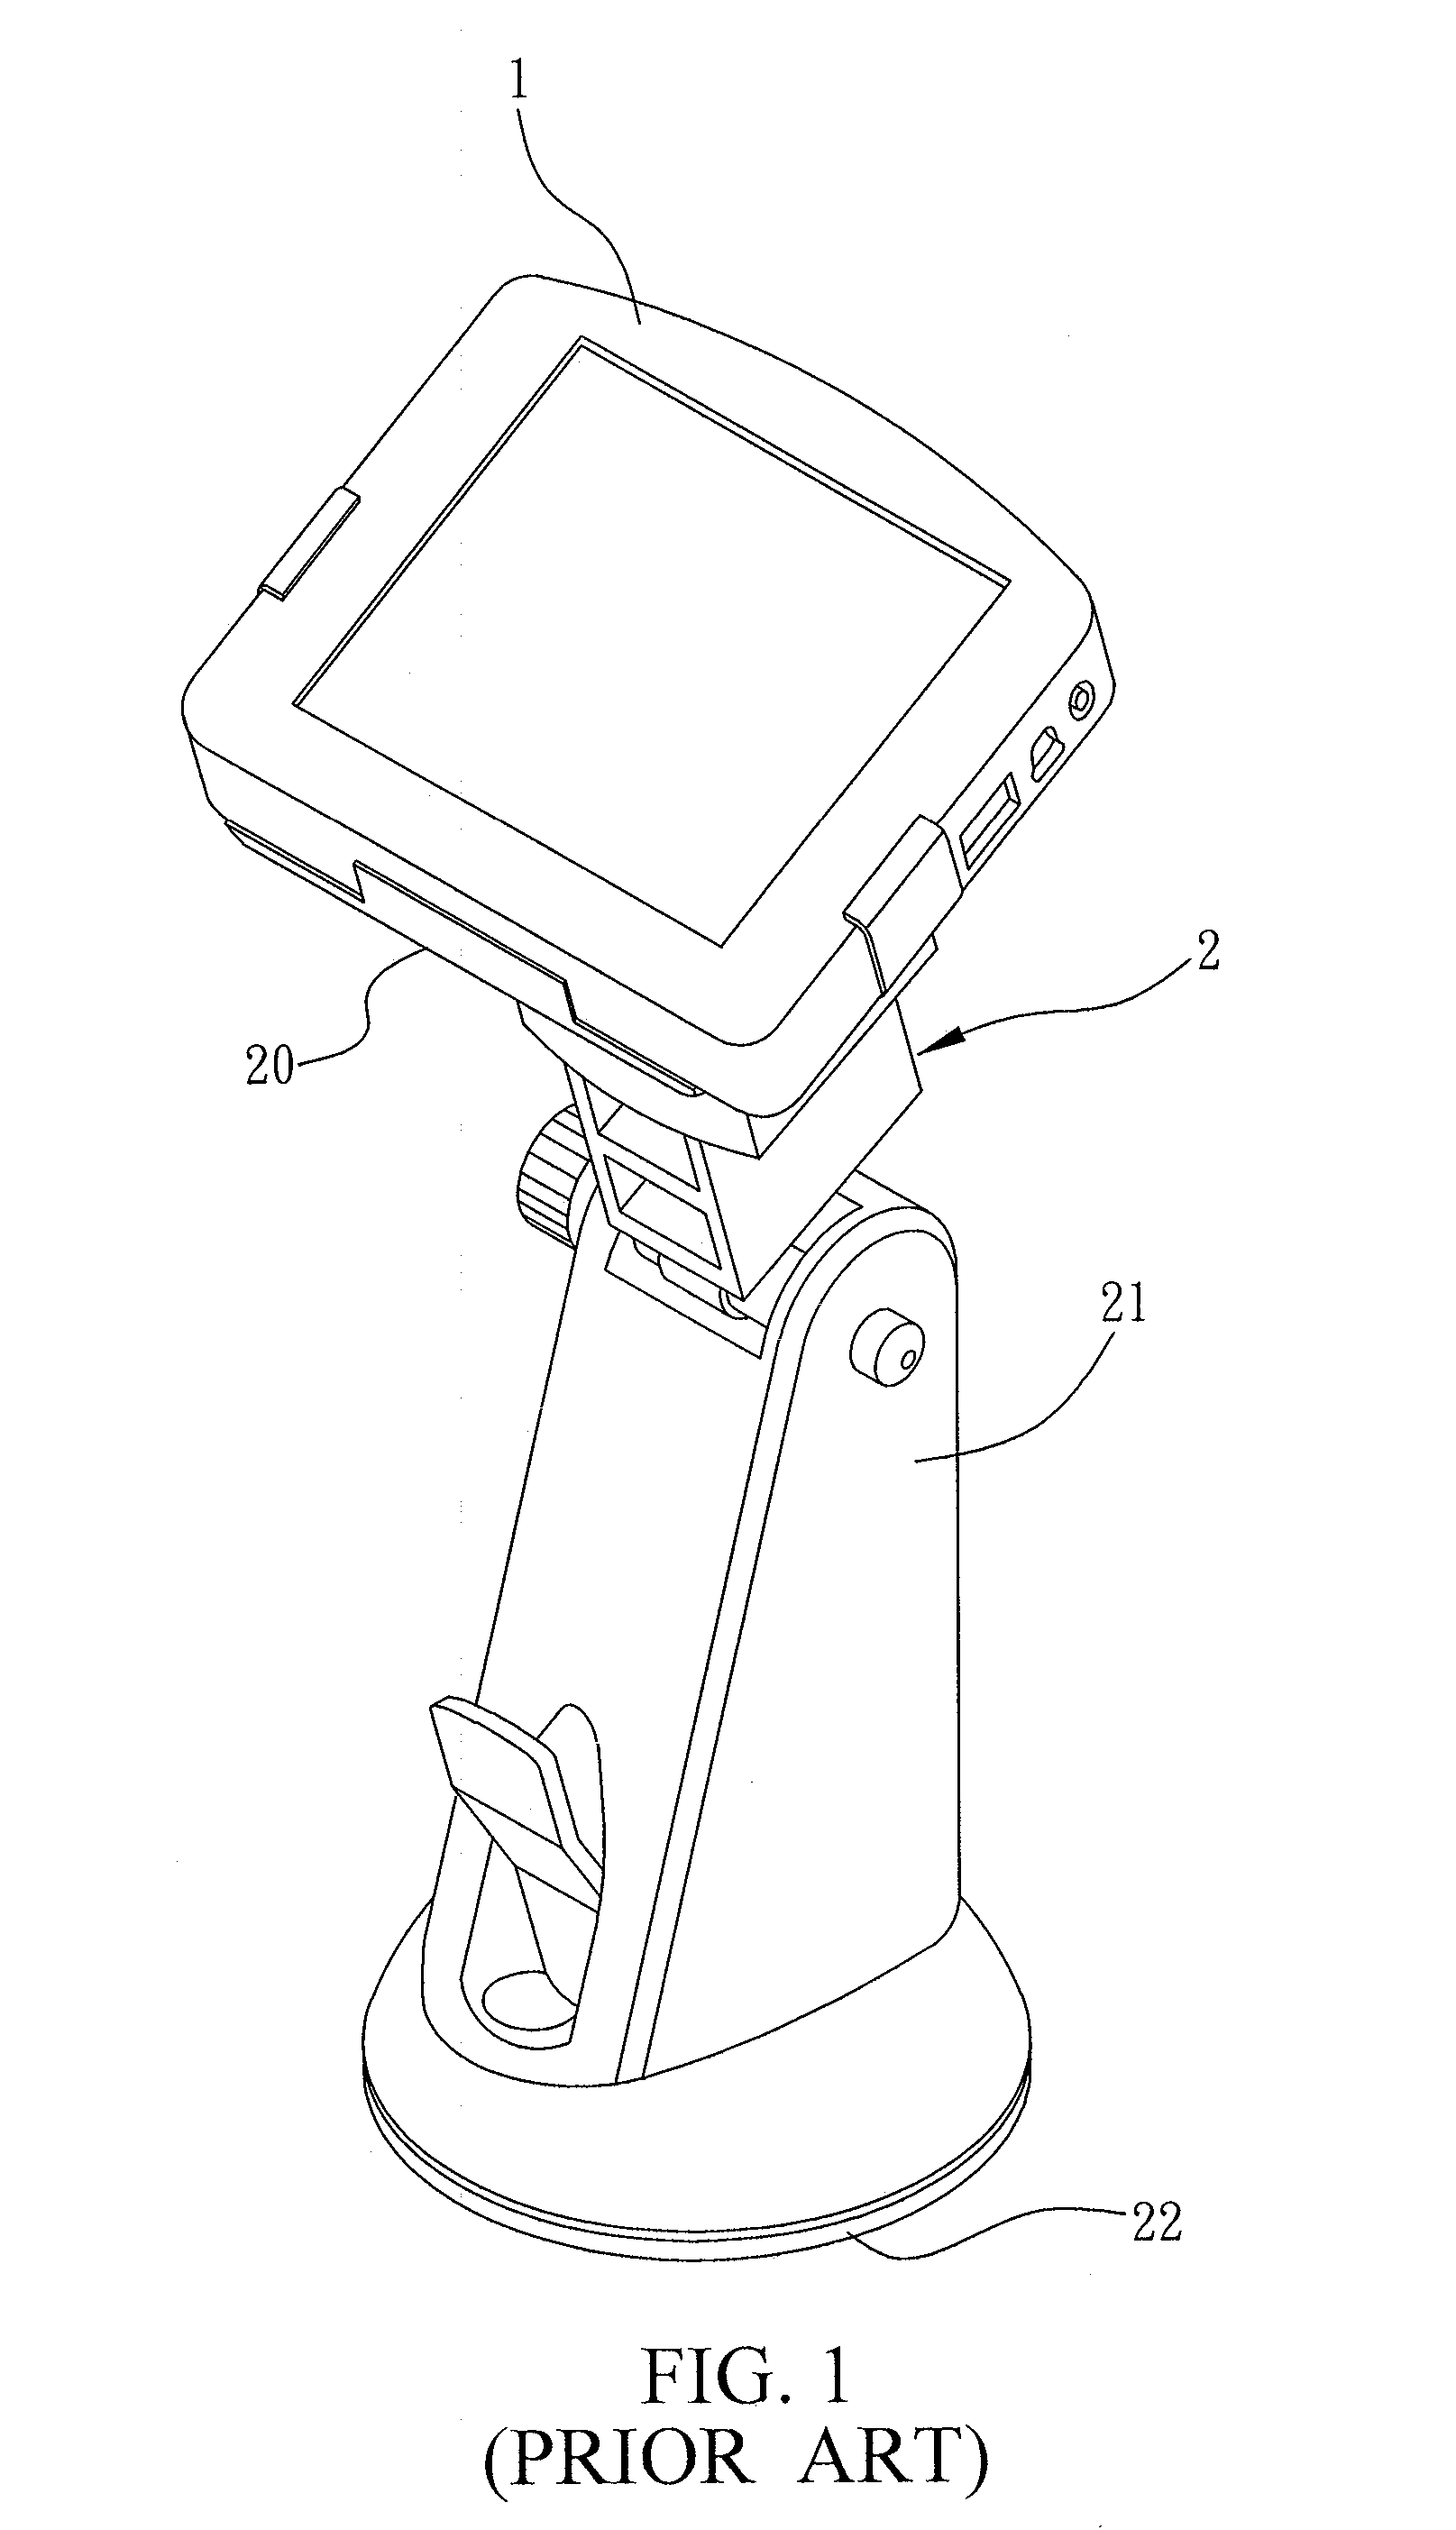 Vibration-proof holder applicable to communication/navigation devices for vehicle use